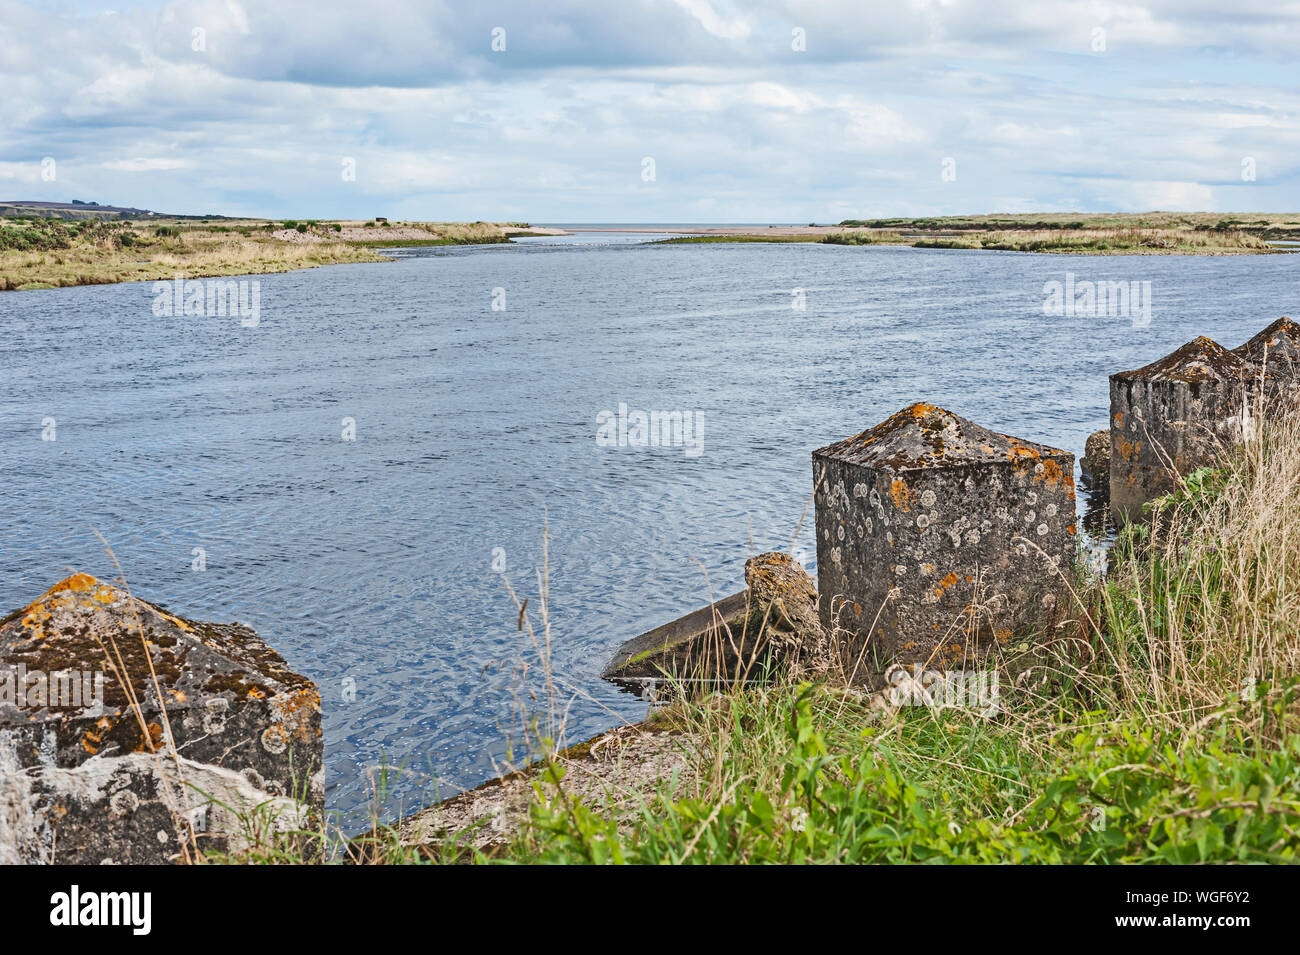 Second World War concrete sea defences on the mouth of the river North Esk, Angus, Scotland, UK with view out to sea. Stock Photo